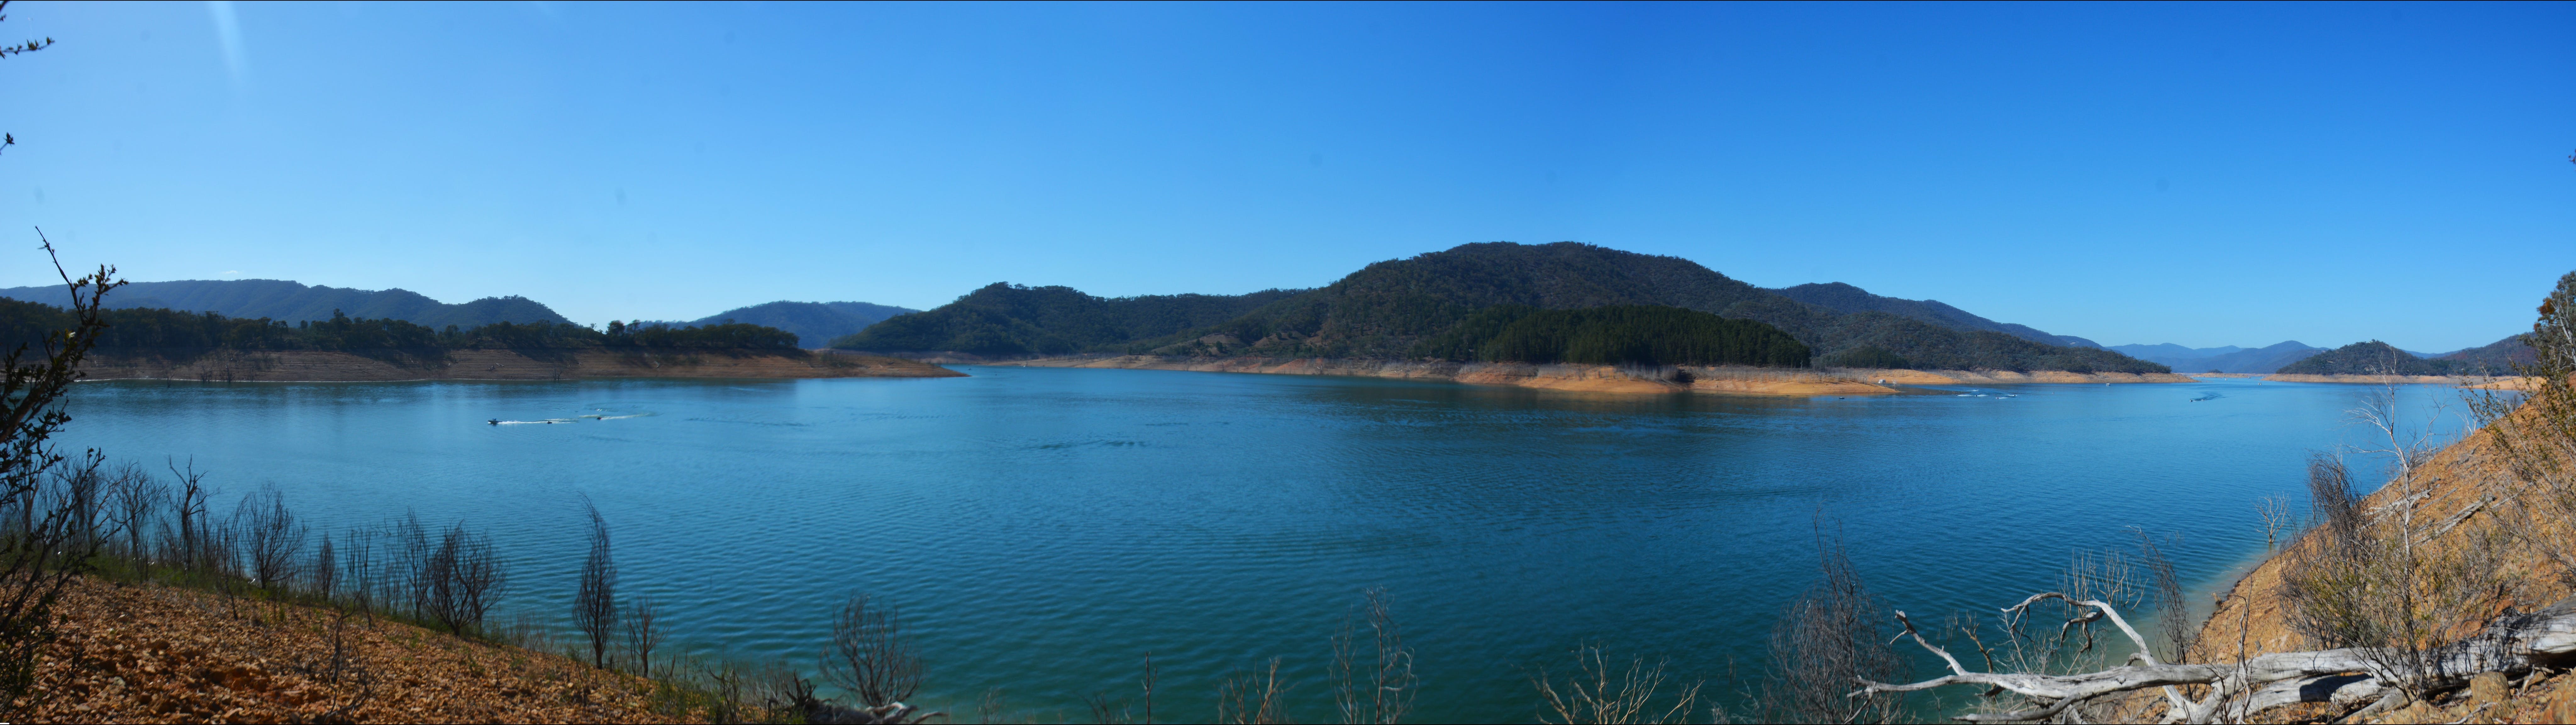 Lake Eildon National Park - Find Attractions